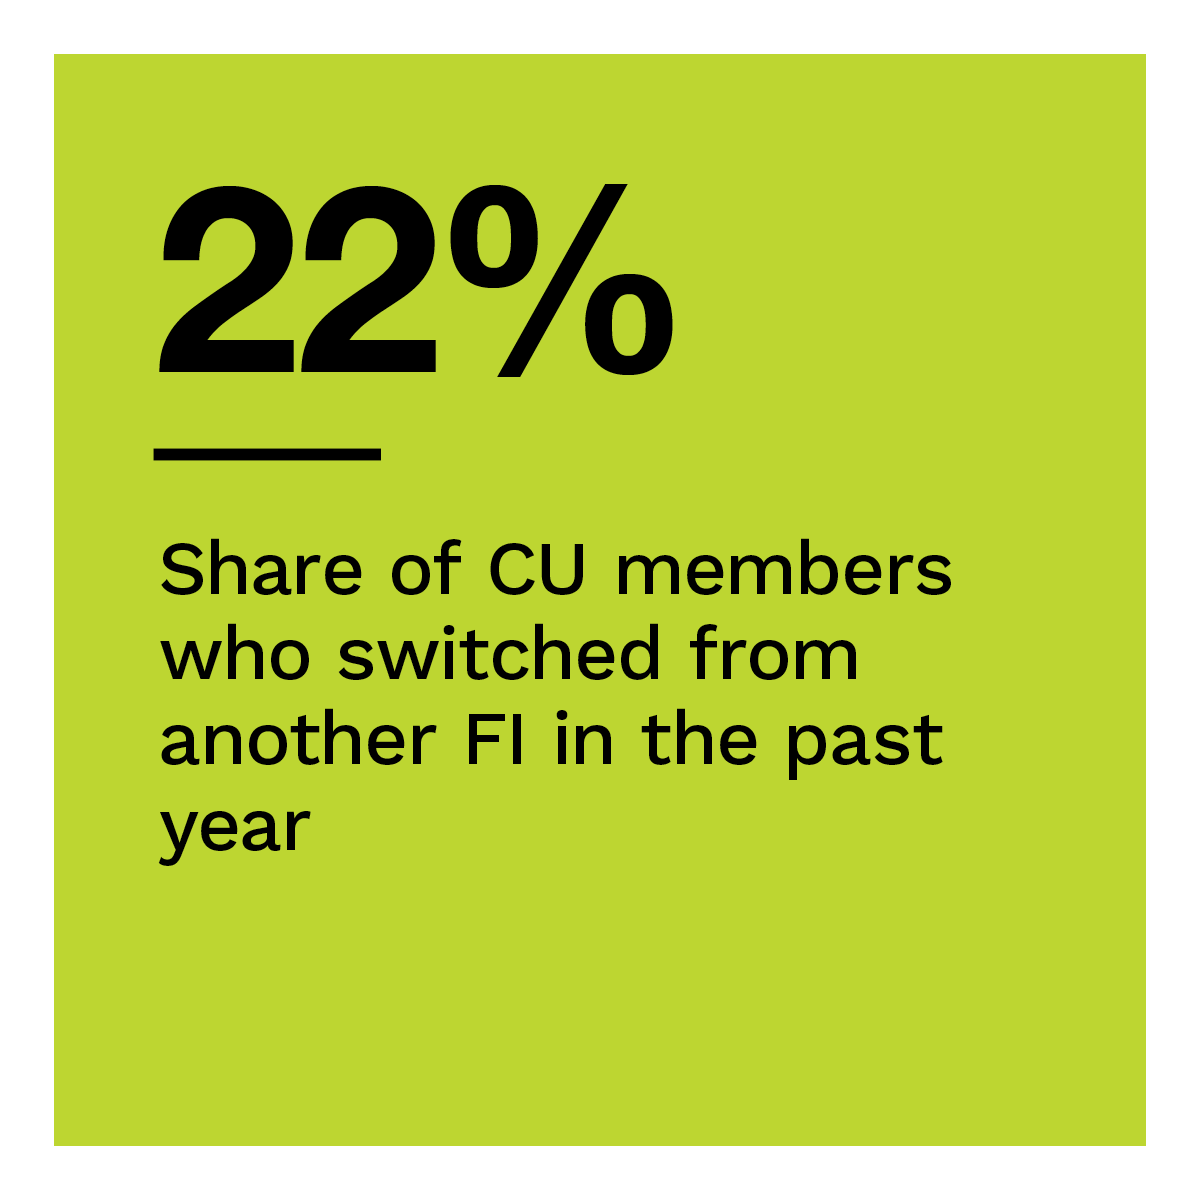  Share of CU members who switched from another FI in the past year